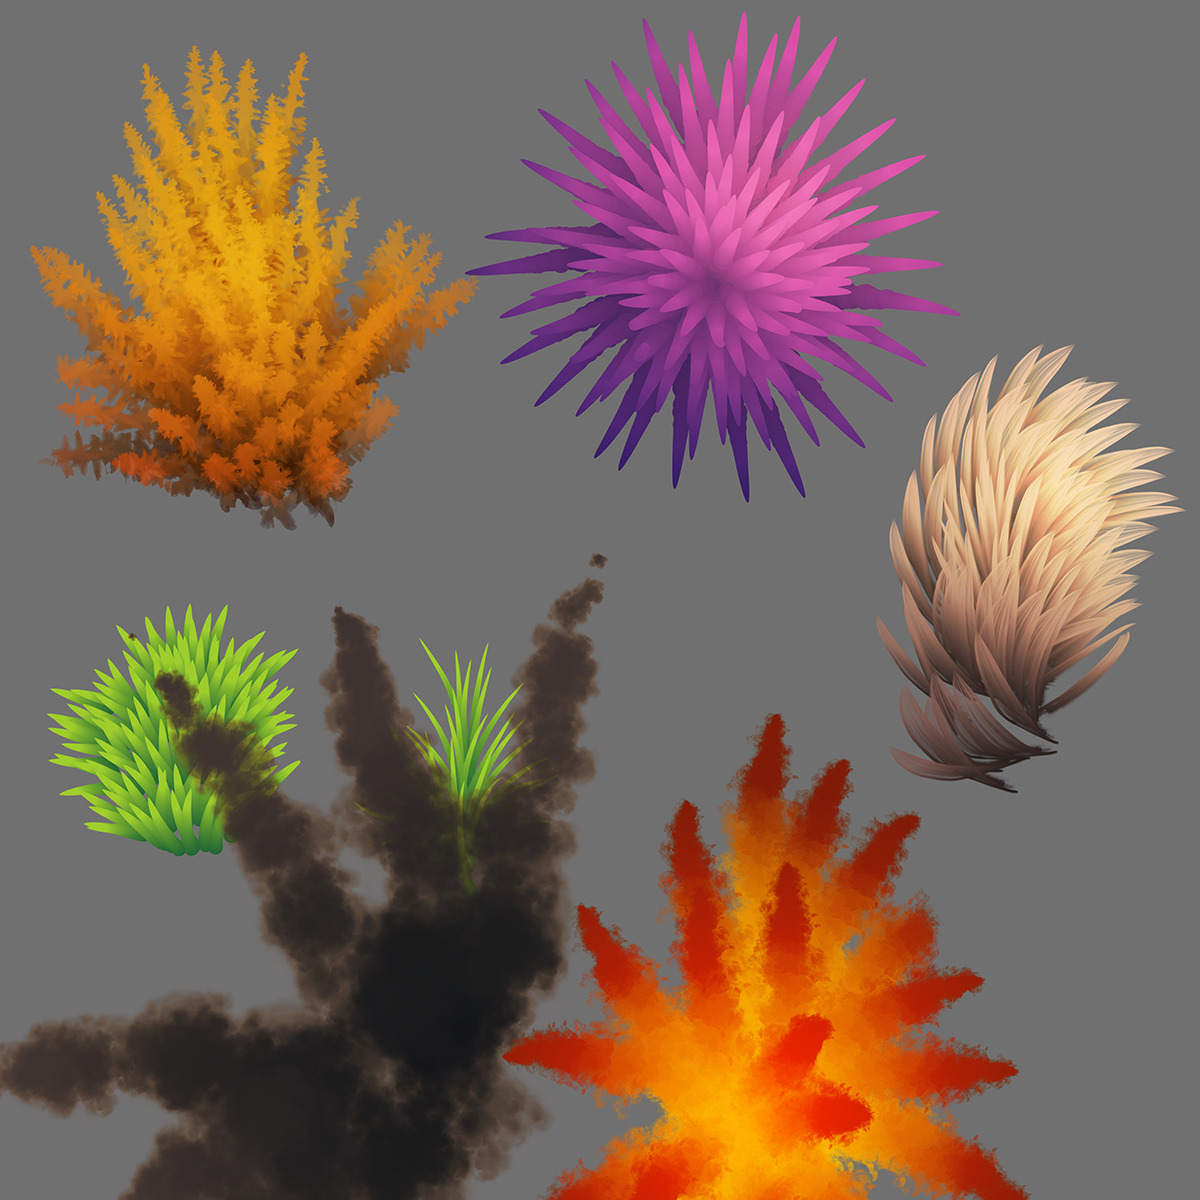 littlecoffeemonsters:
“ pwnypony:
“ makkon:
“ Watched this awesome tutorial on painting quick and easy grass.
I can apply it to other things like TREES, SPIKEY THINGS, FUR, FEATHERS, EXPLOSIONS
THIS CHANGES EVERYTHING
”
………..
omg that lighter color...